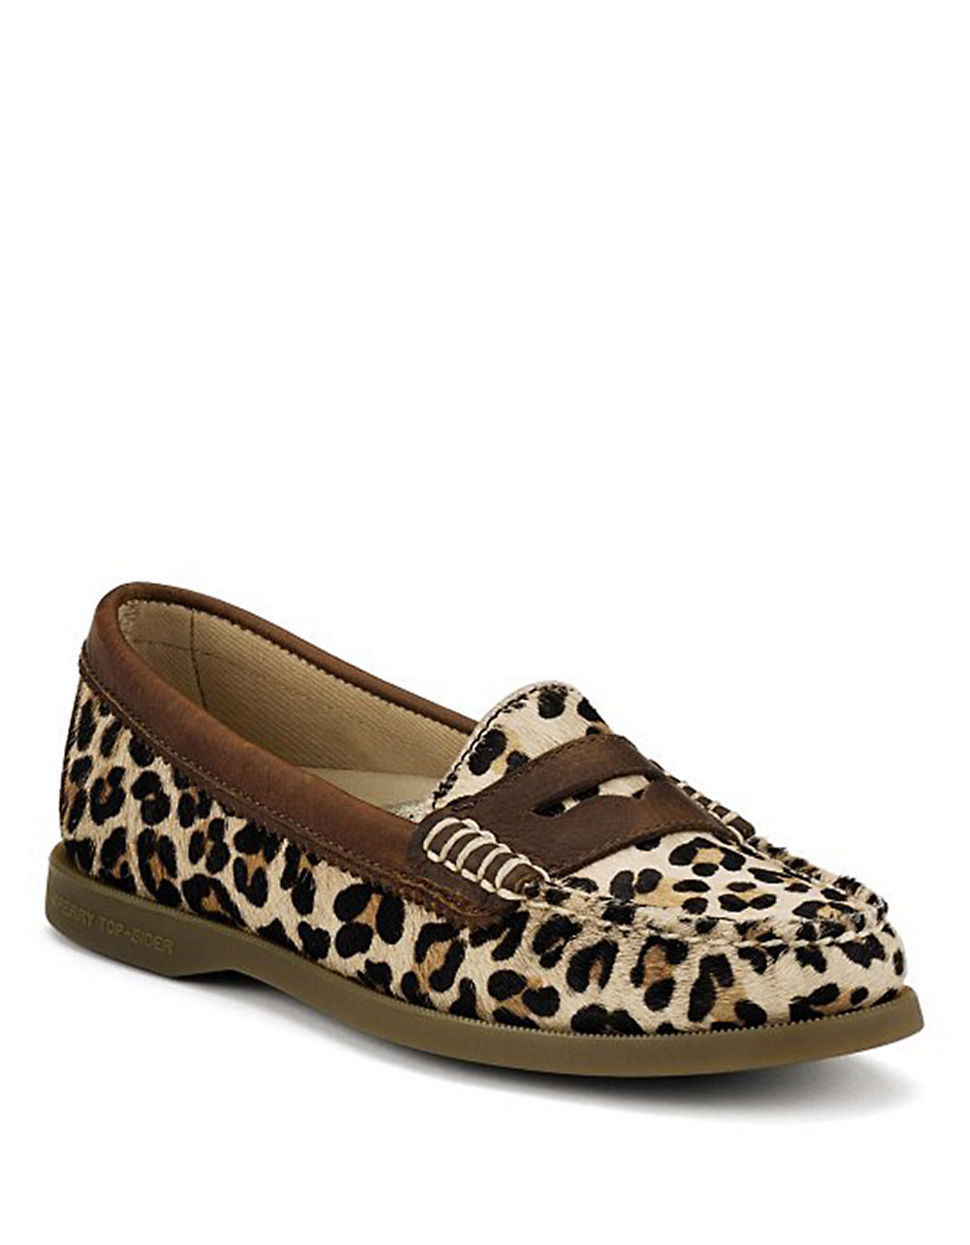 Lyst - Sperry top-sider Hayden Leopard-Print Calf Hair Loafers